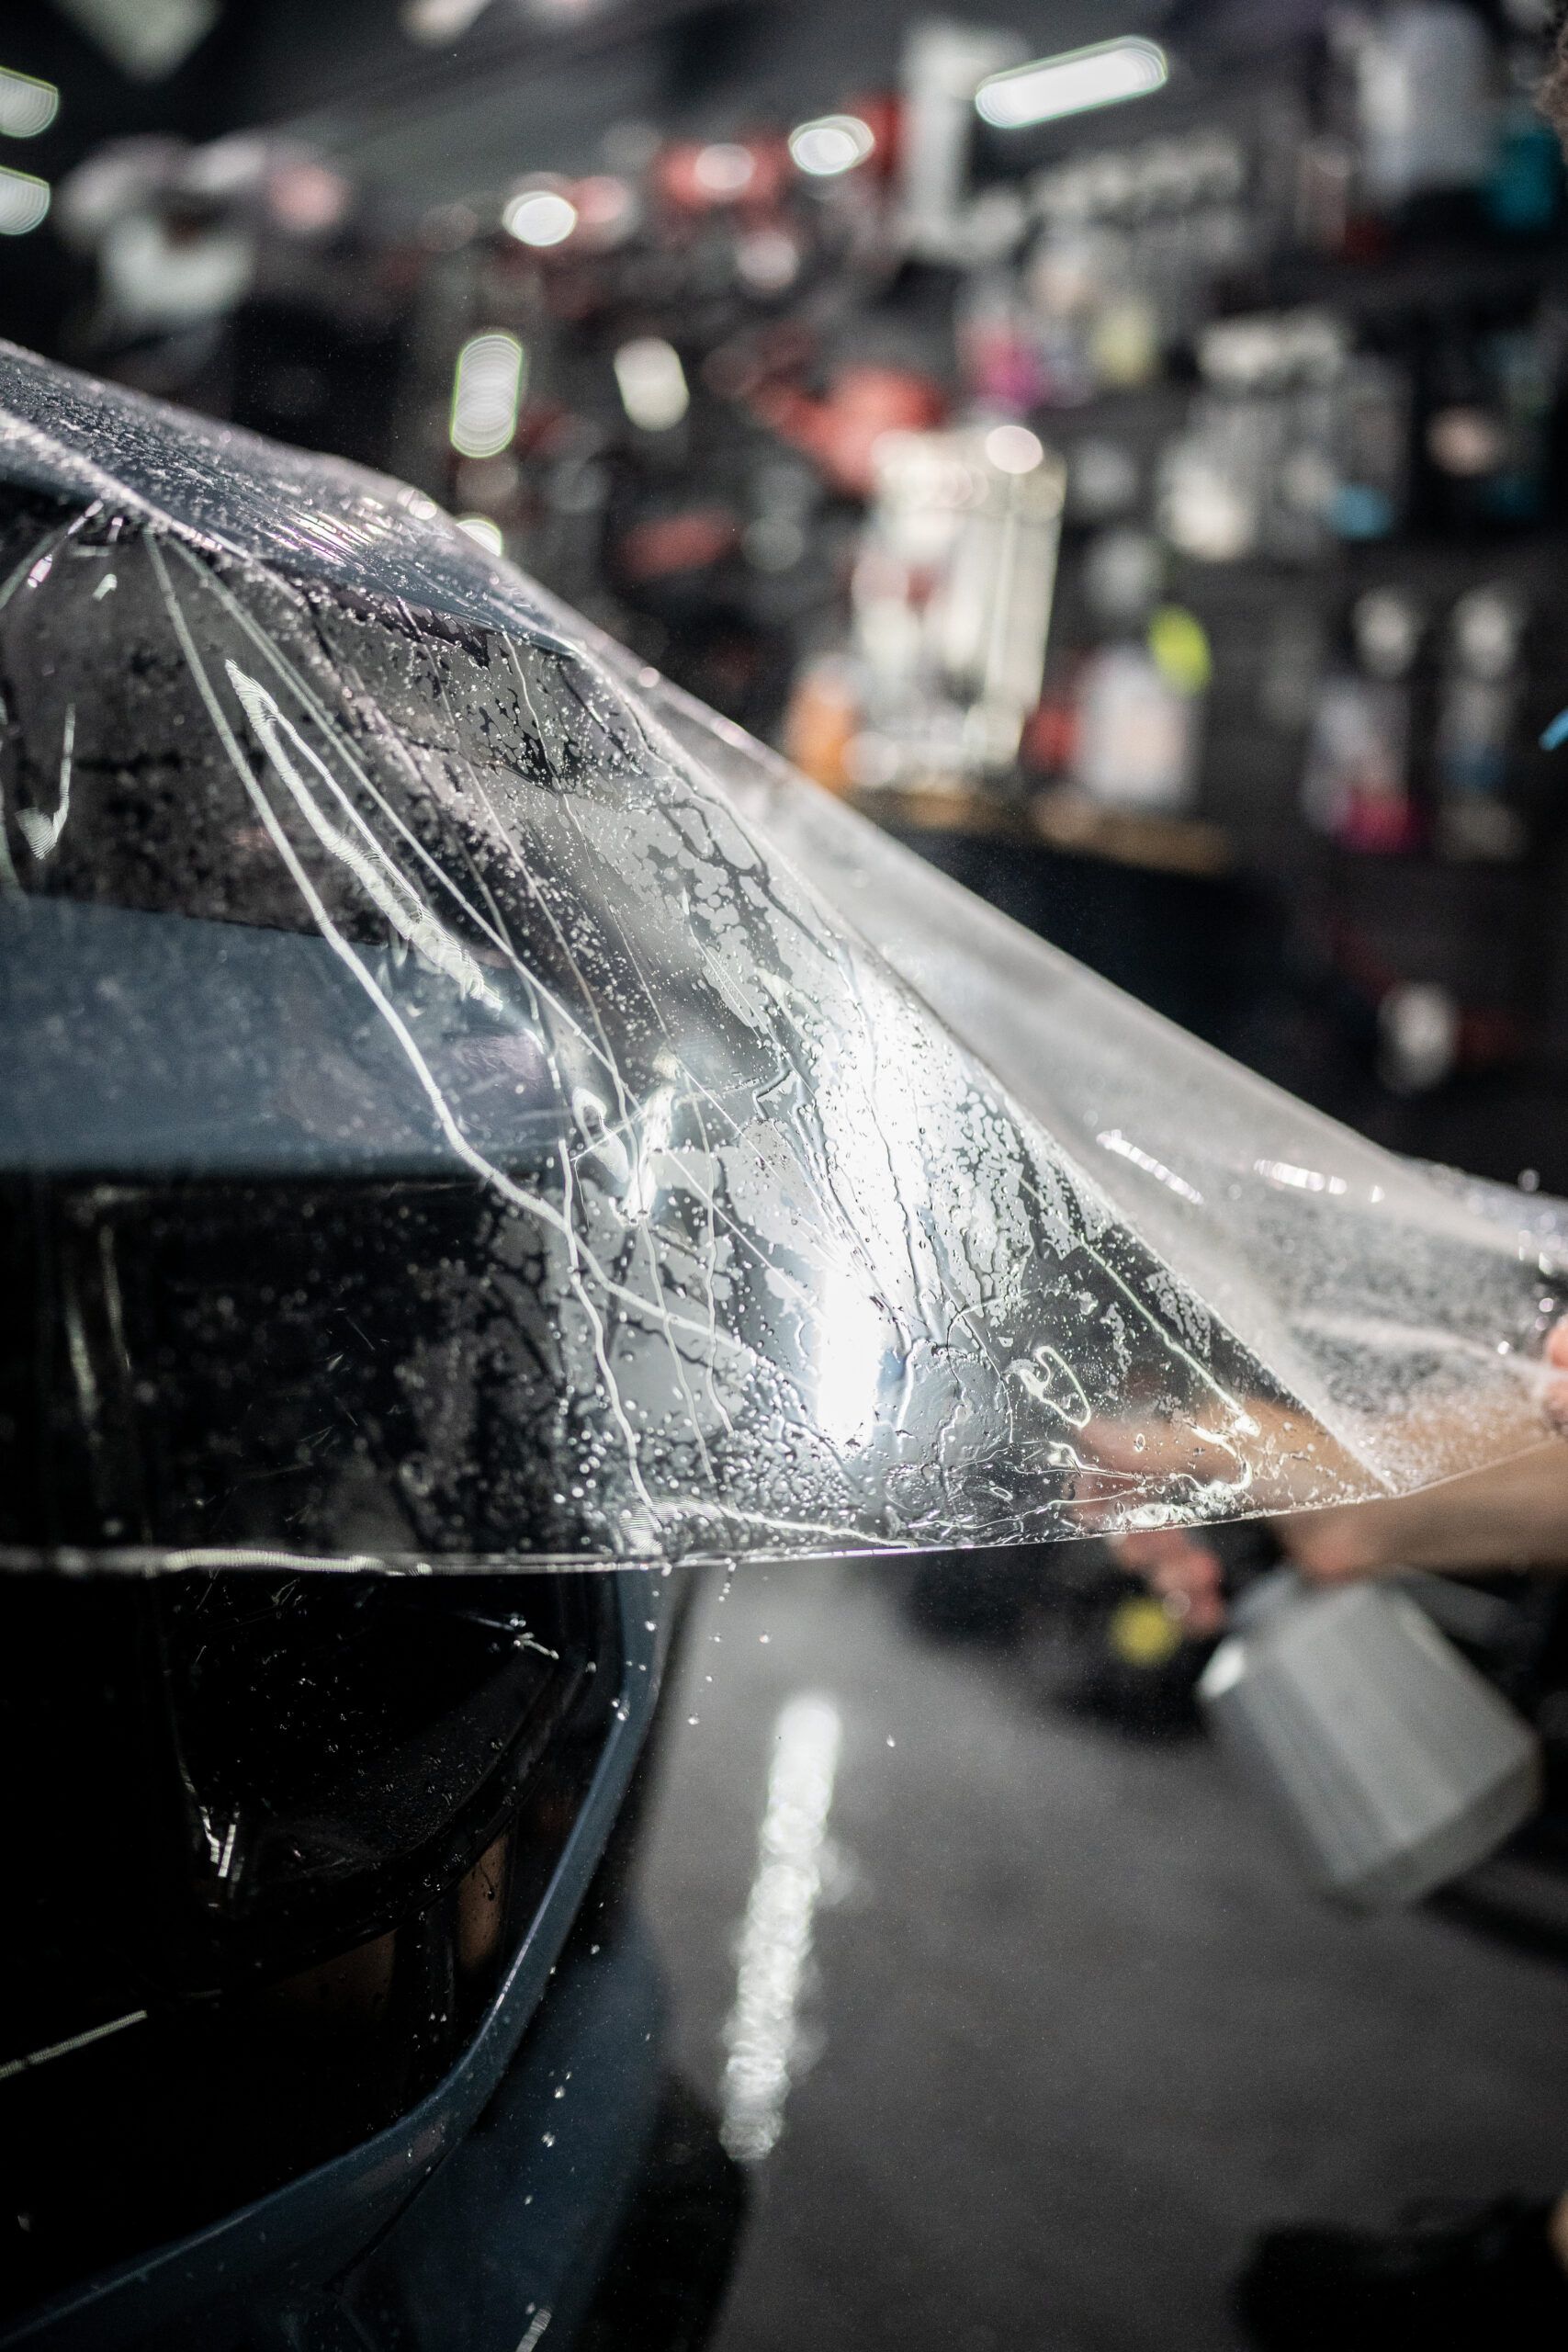 A person is wrapping a car with a clear plastic sheet.